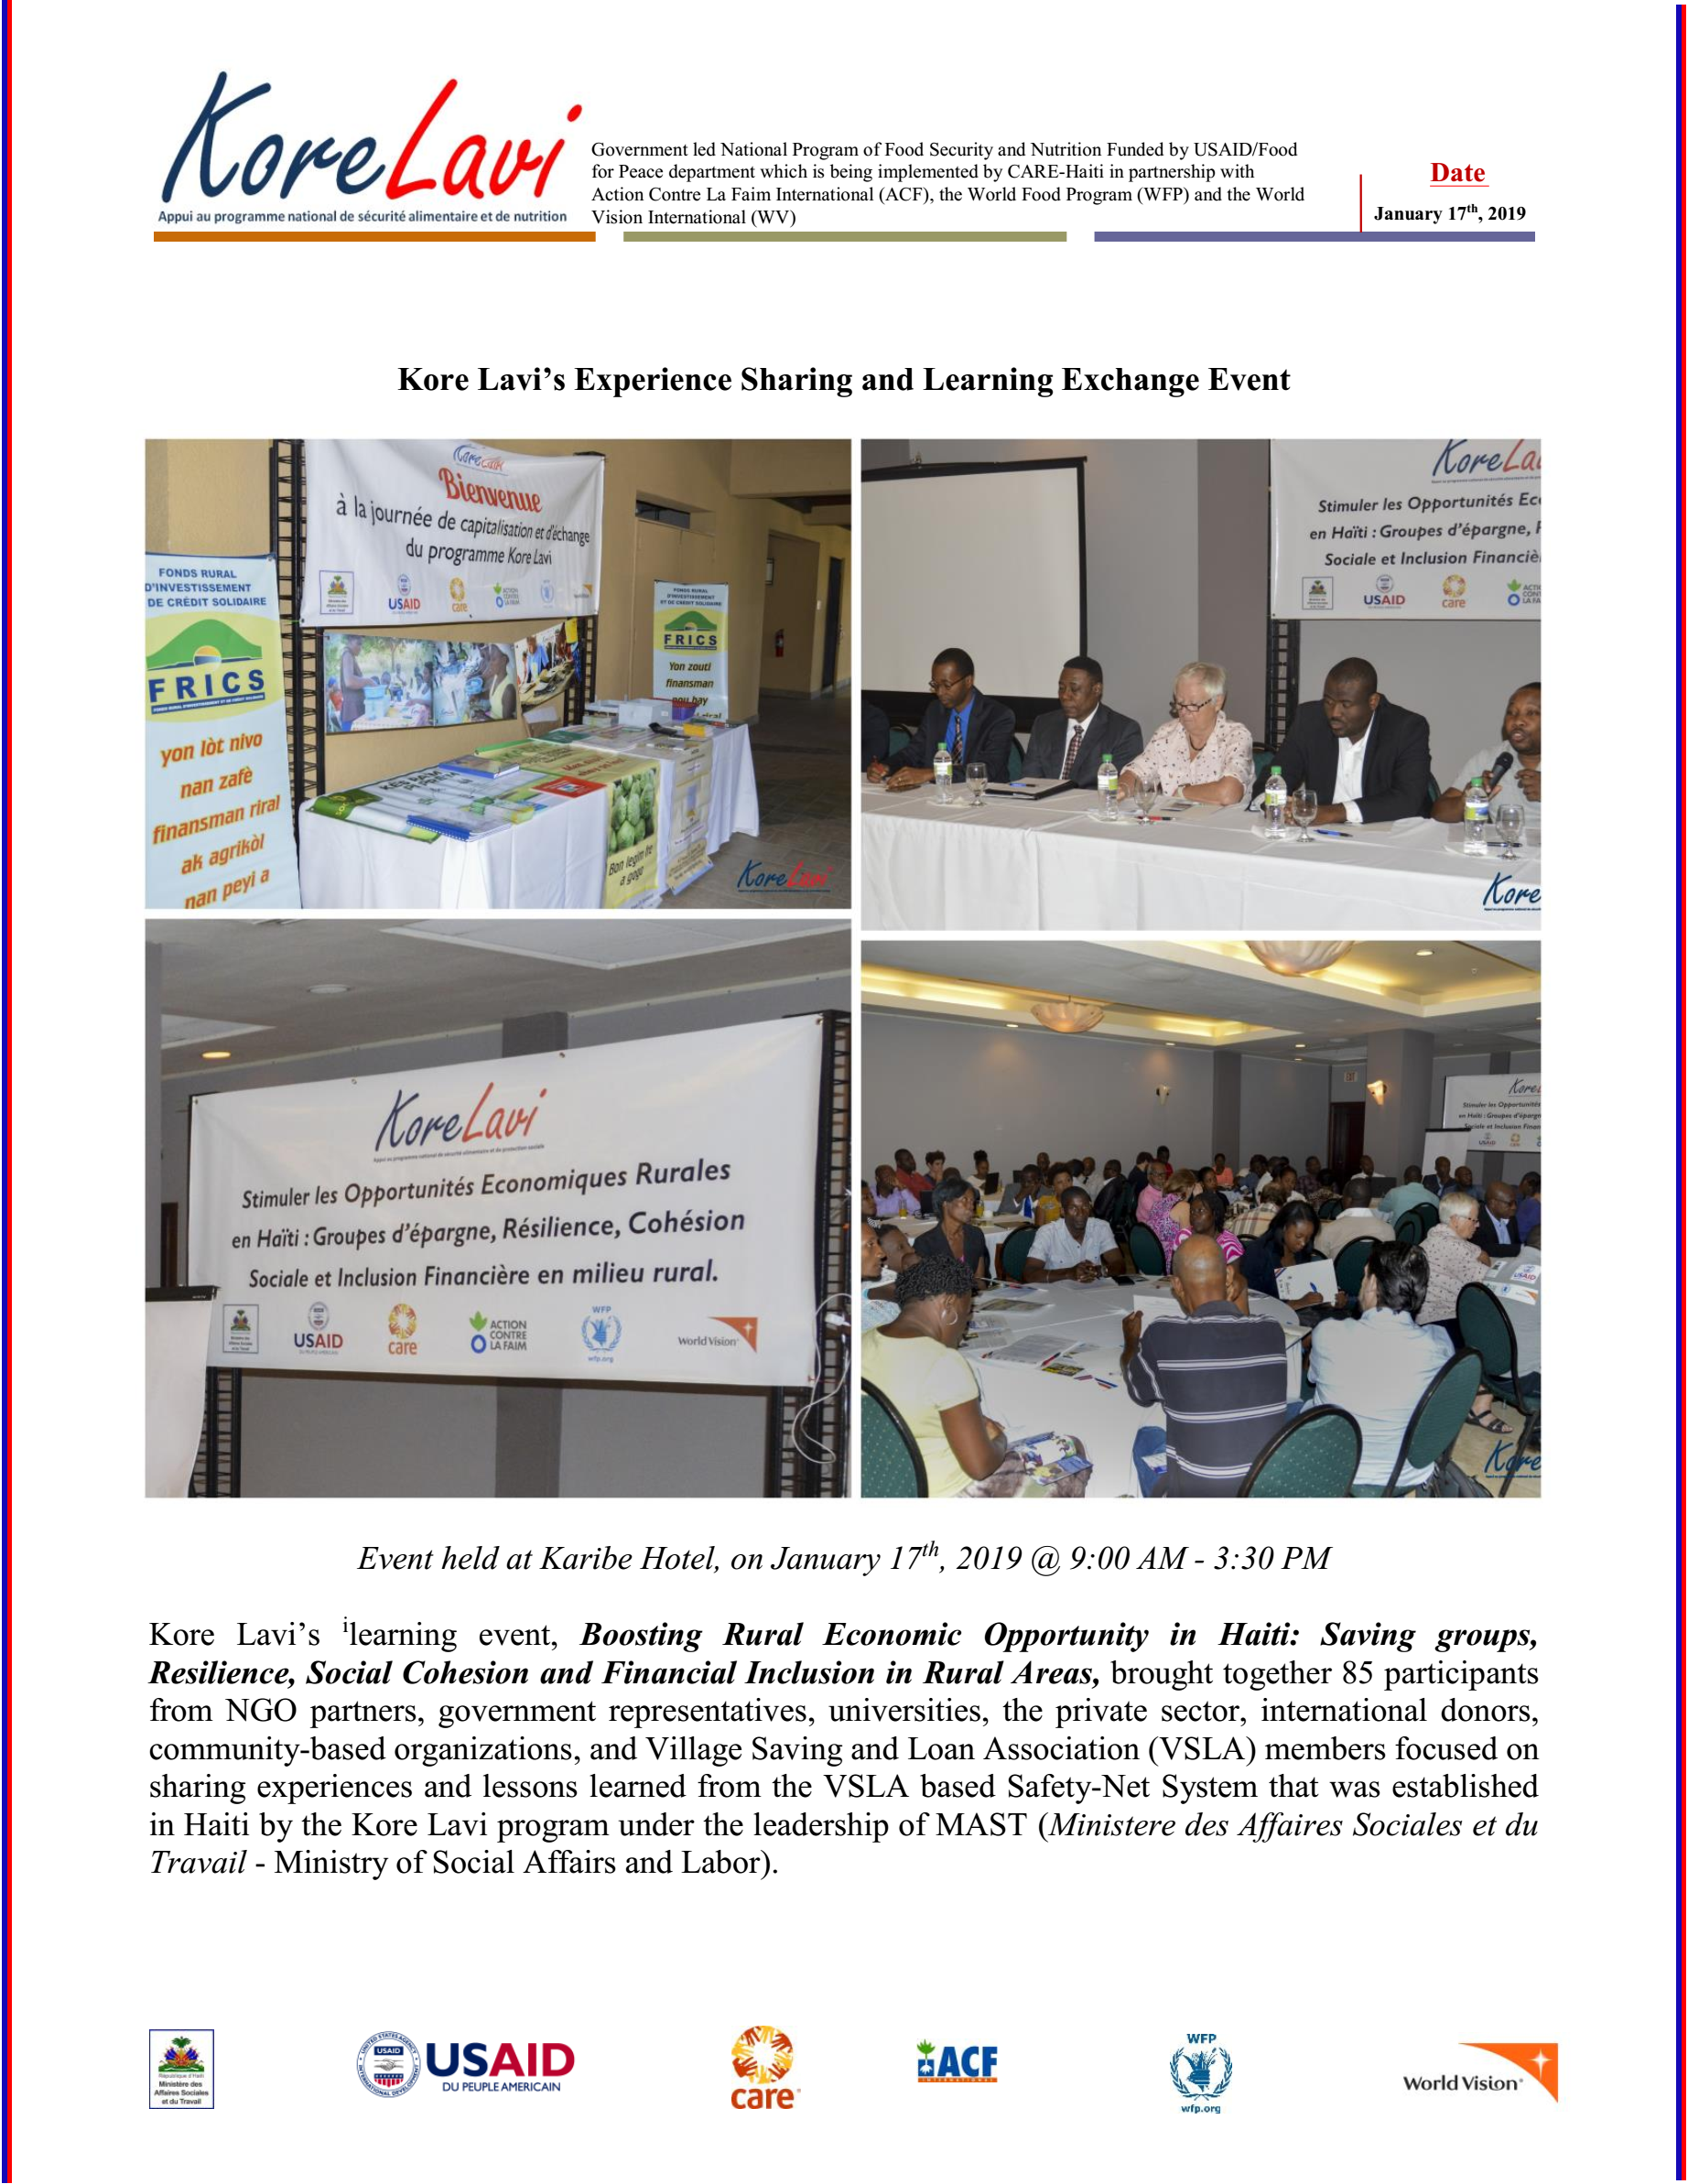 Kore Lavi's Experience Sharing and Learning Exchange Event